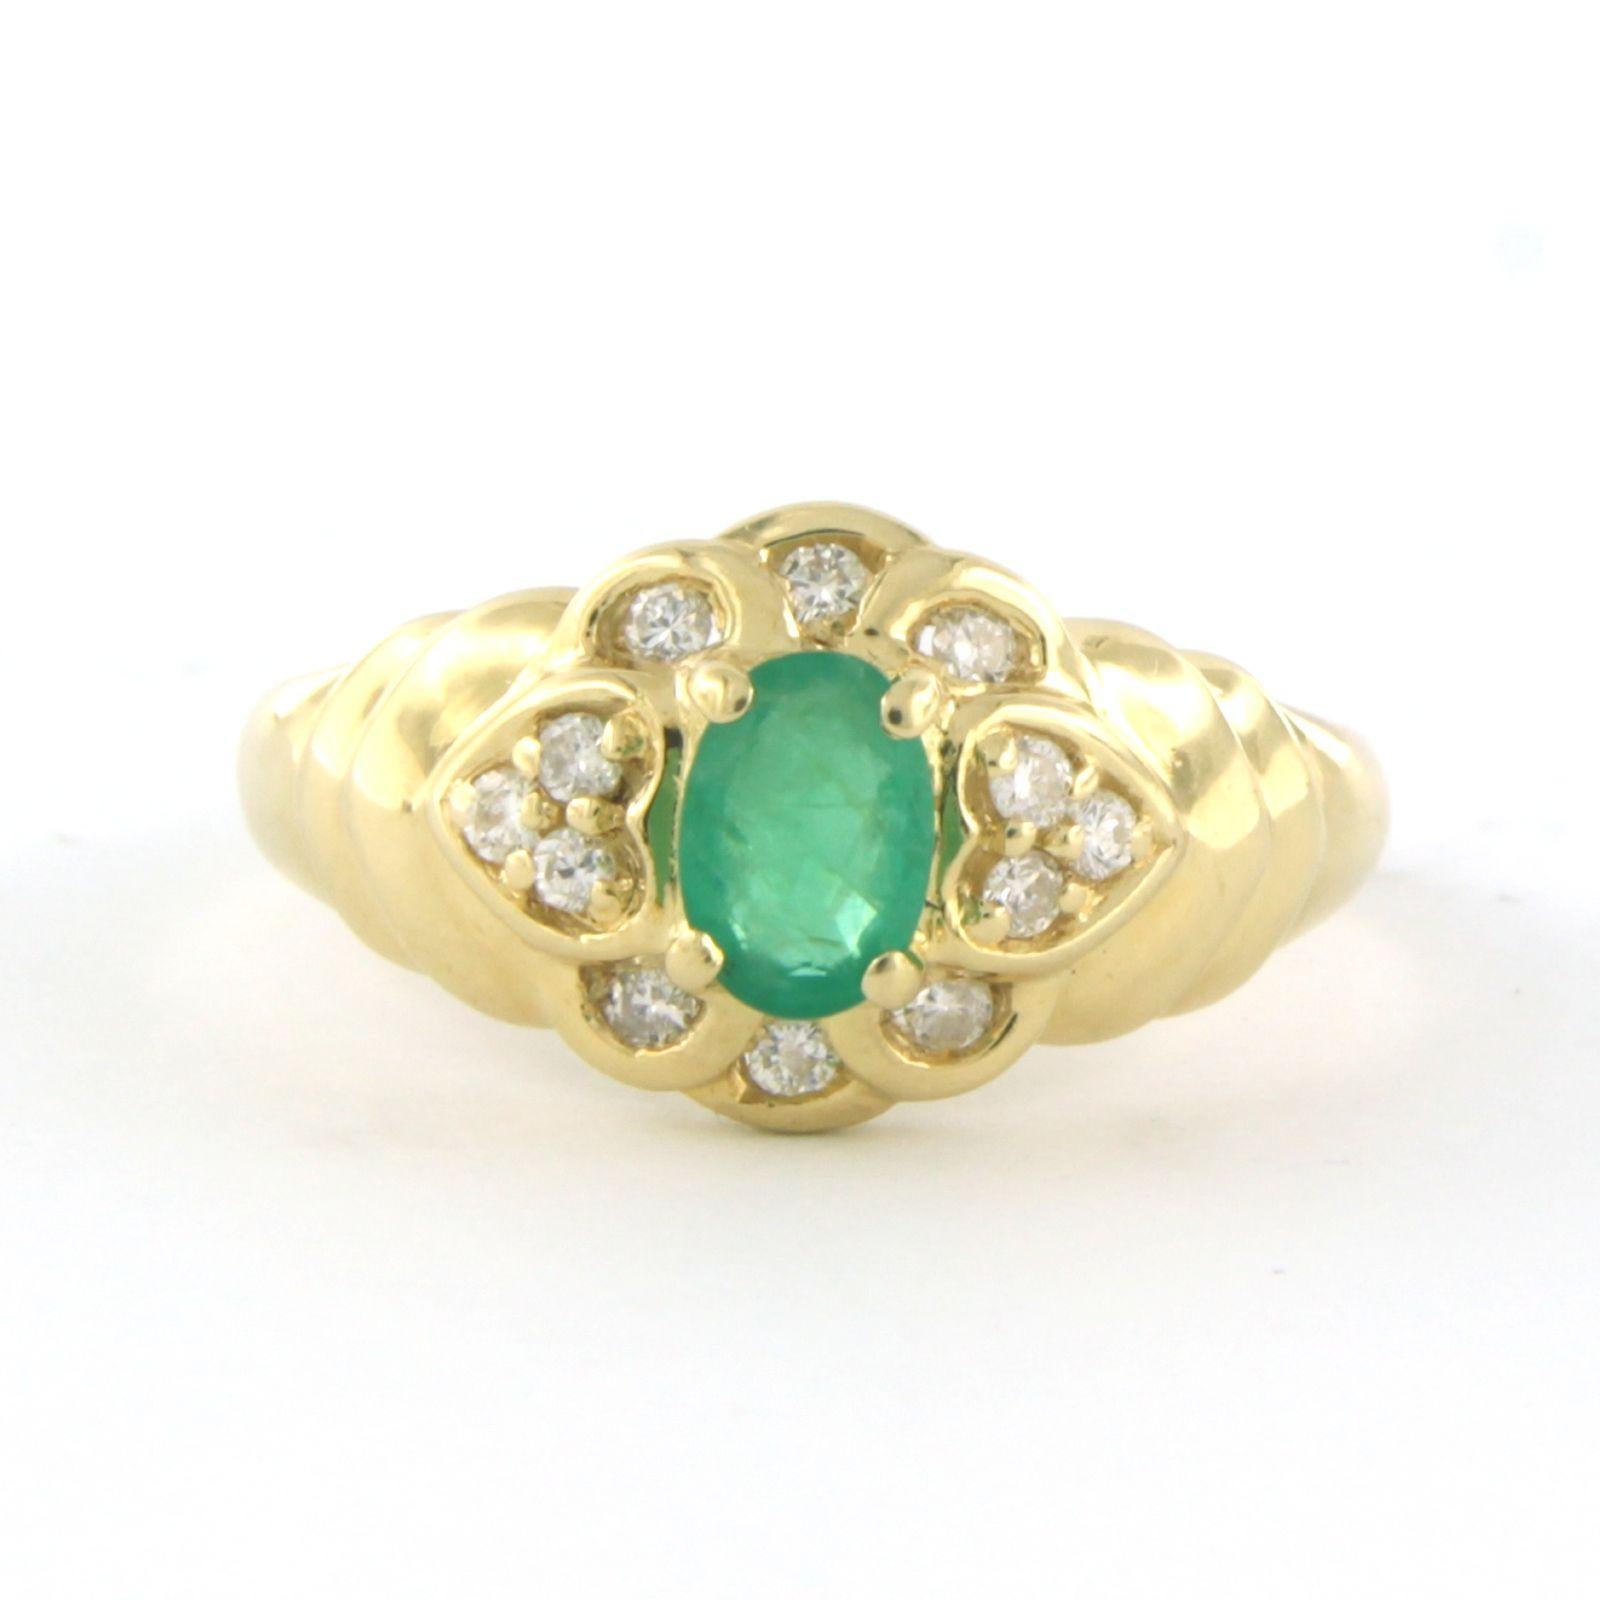 18k yellow gold ring set with emerald and brilliant cut diamond 0.20 ct - ring size US. 7.5 - EU. 18(56)

detailed description:

The top of the ring is 1.0 cm wide

ring size US 7.5 - EU. 18(56), ring can be enlarged or reduced a few sizes at cost